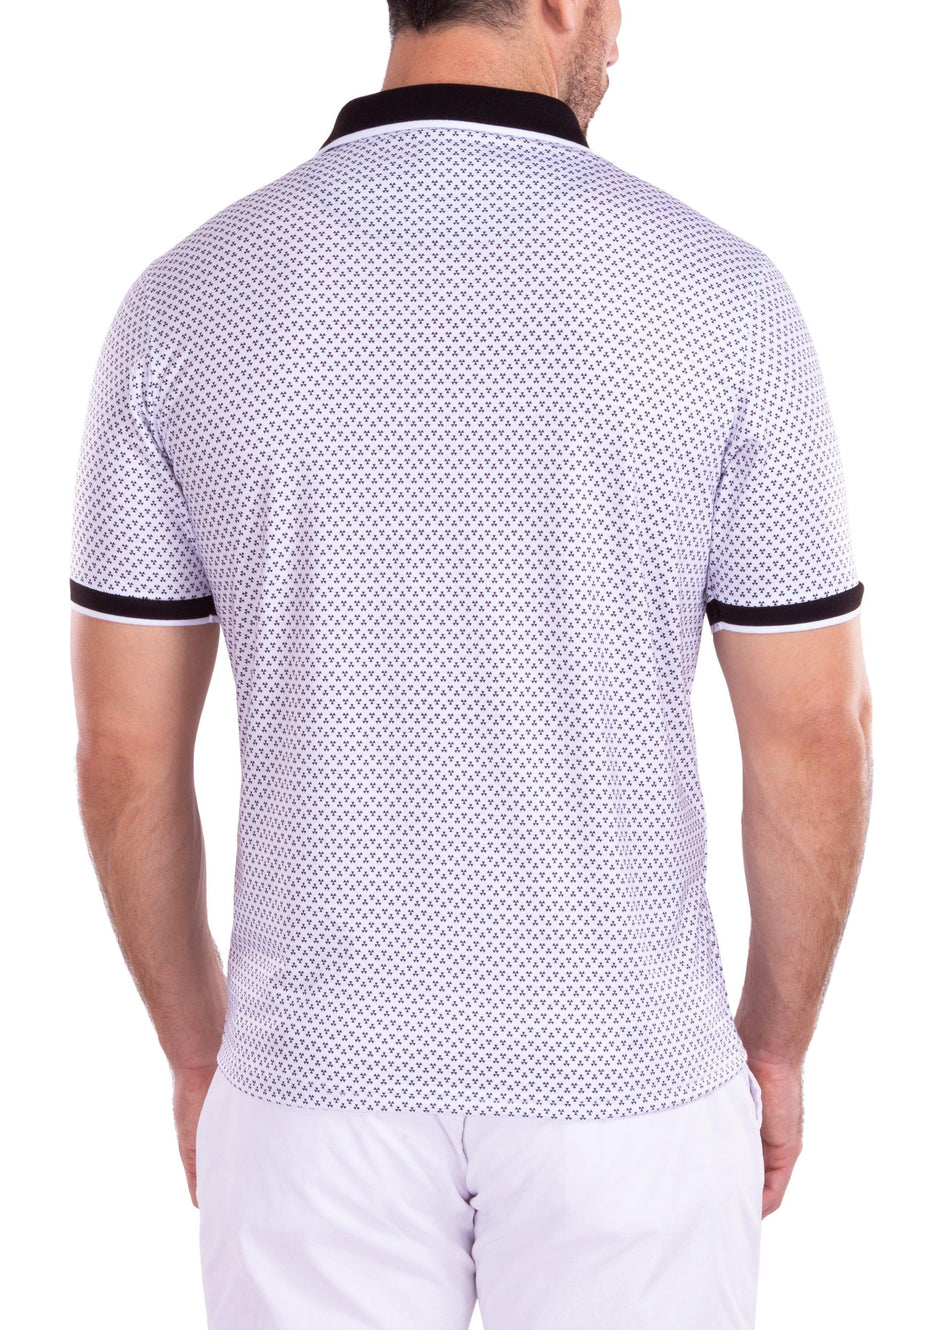 Contrast Triangle Pattern Printed Polo Shirt White